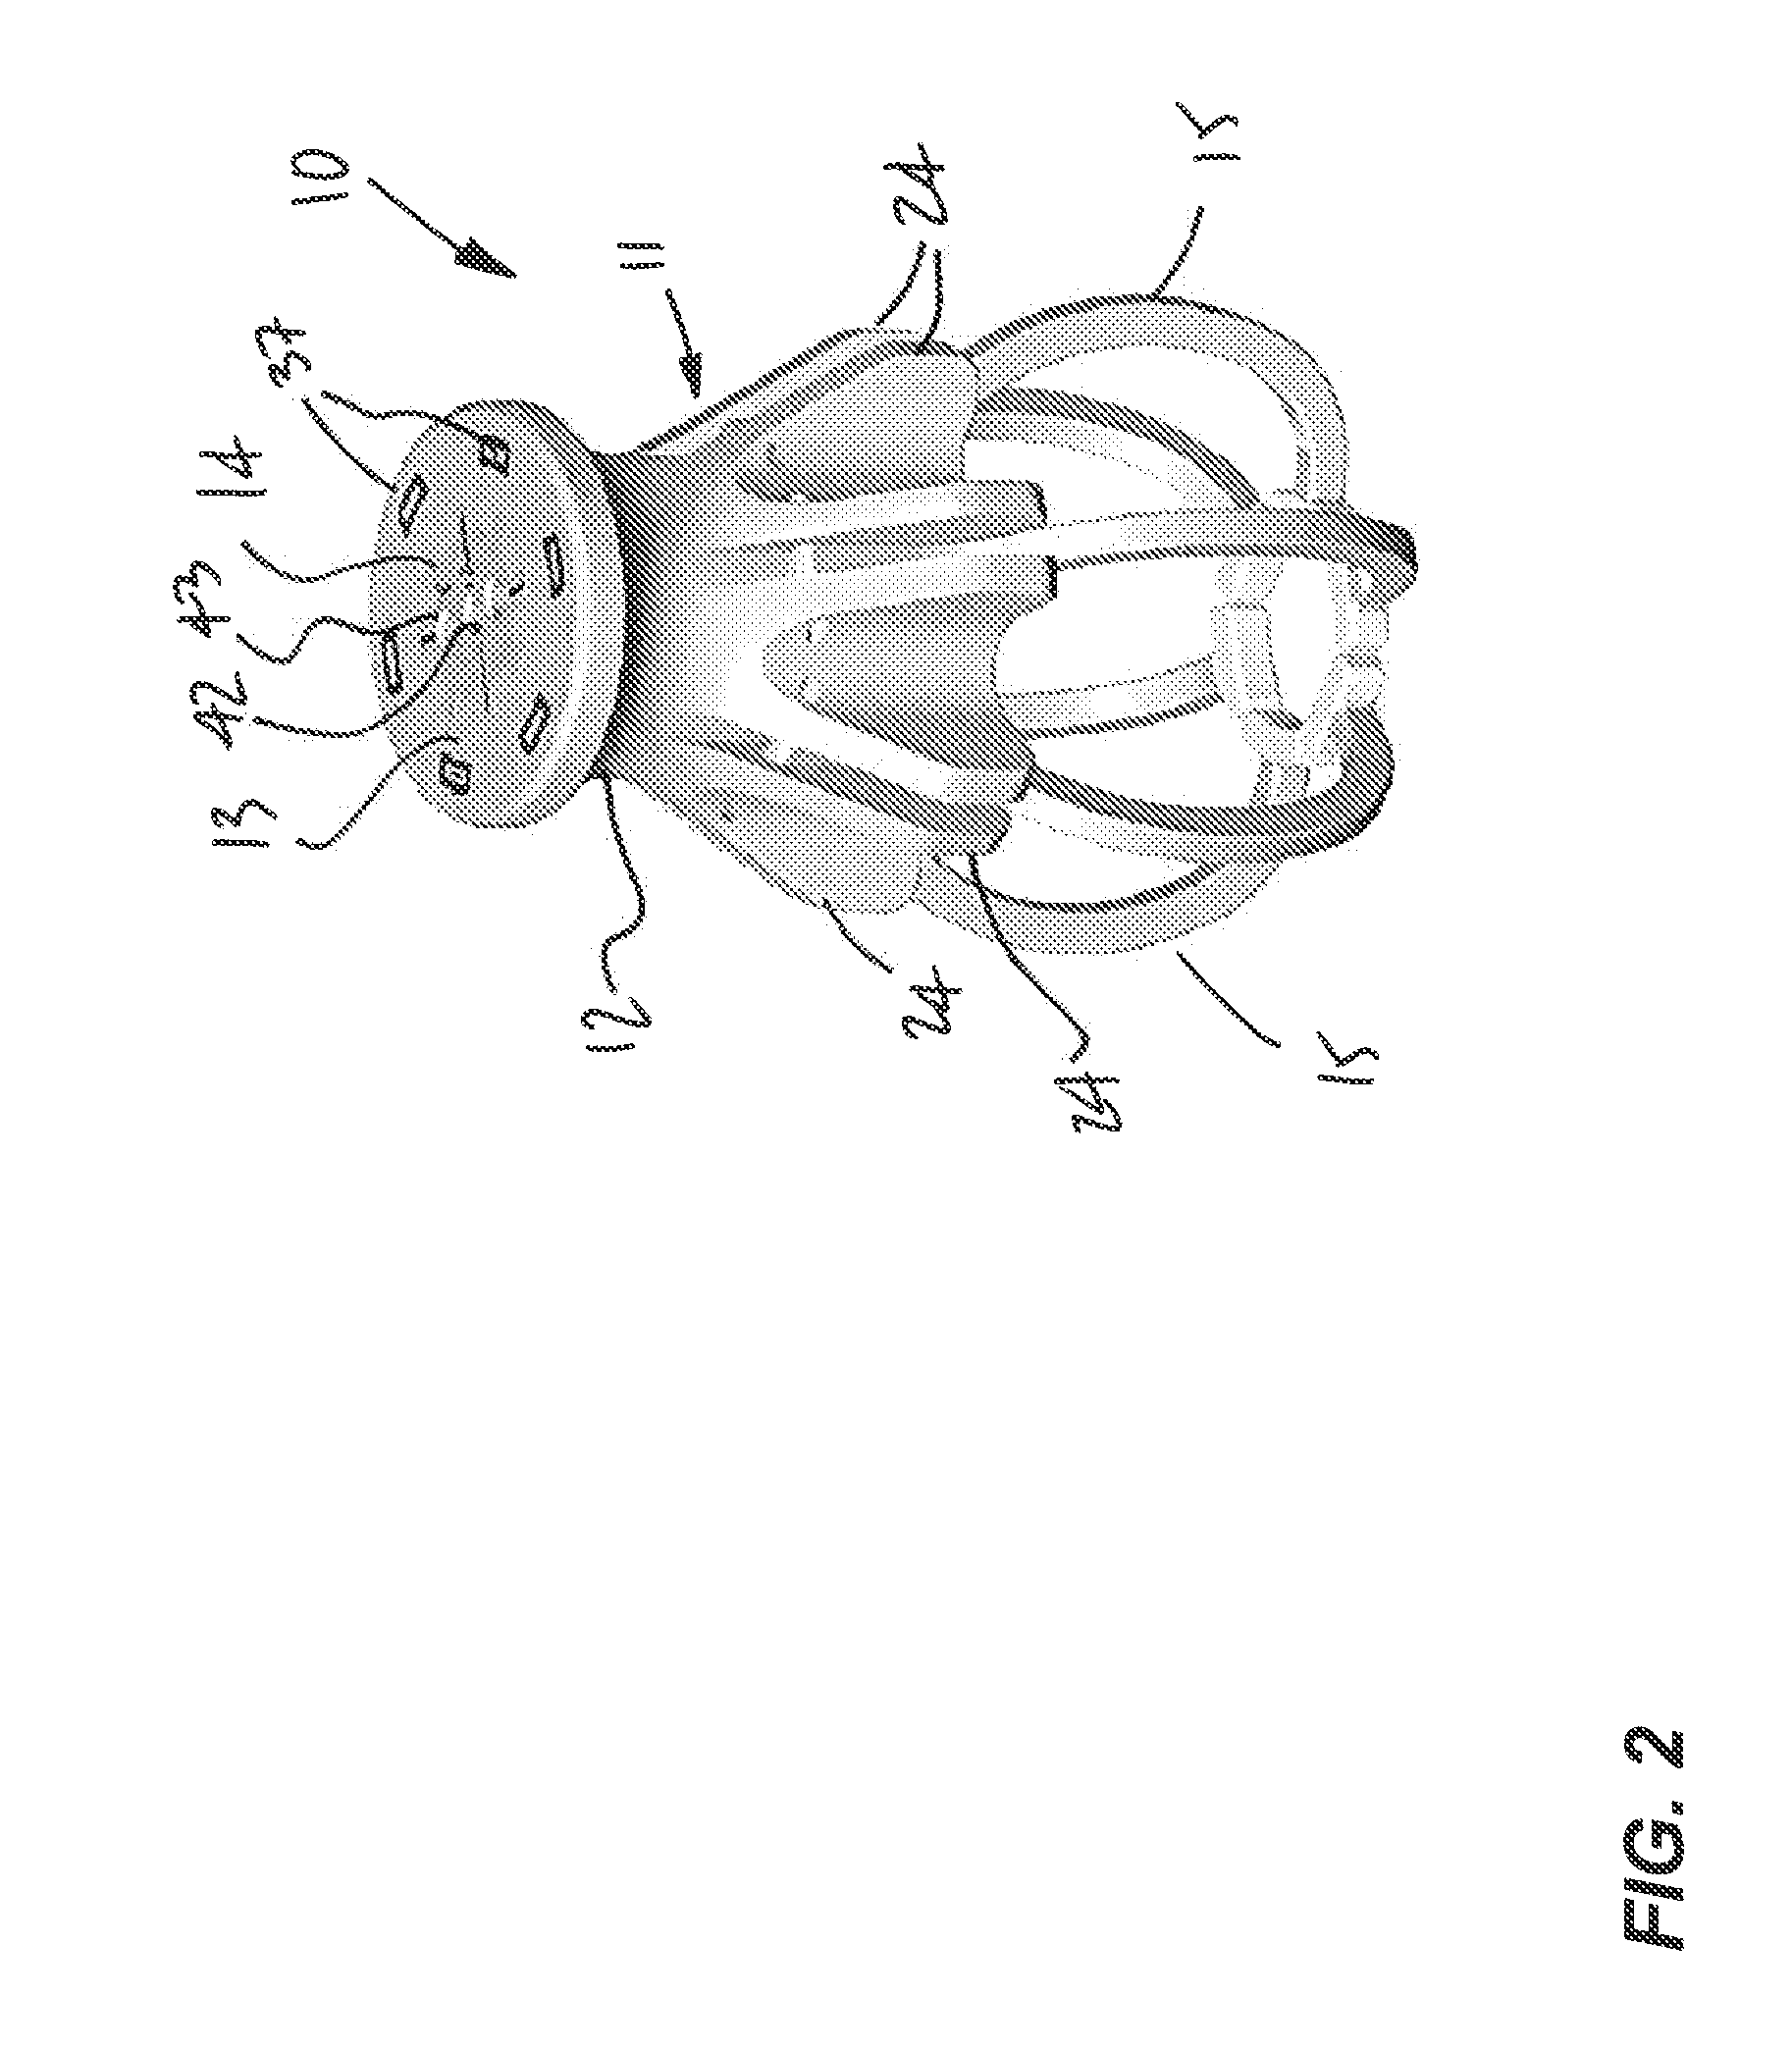 Hip resurfacing drill guide device